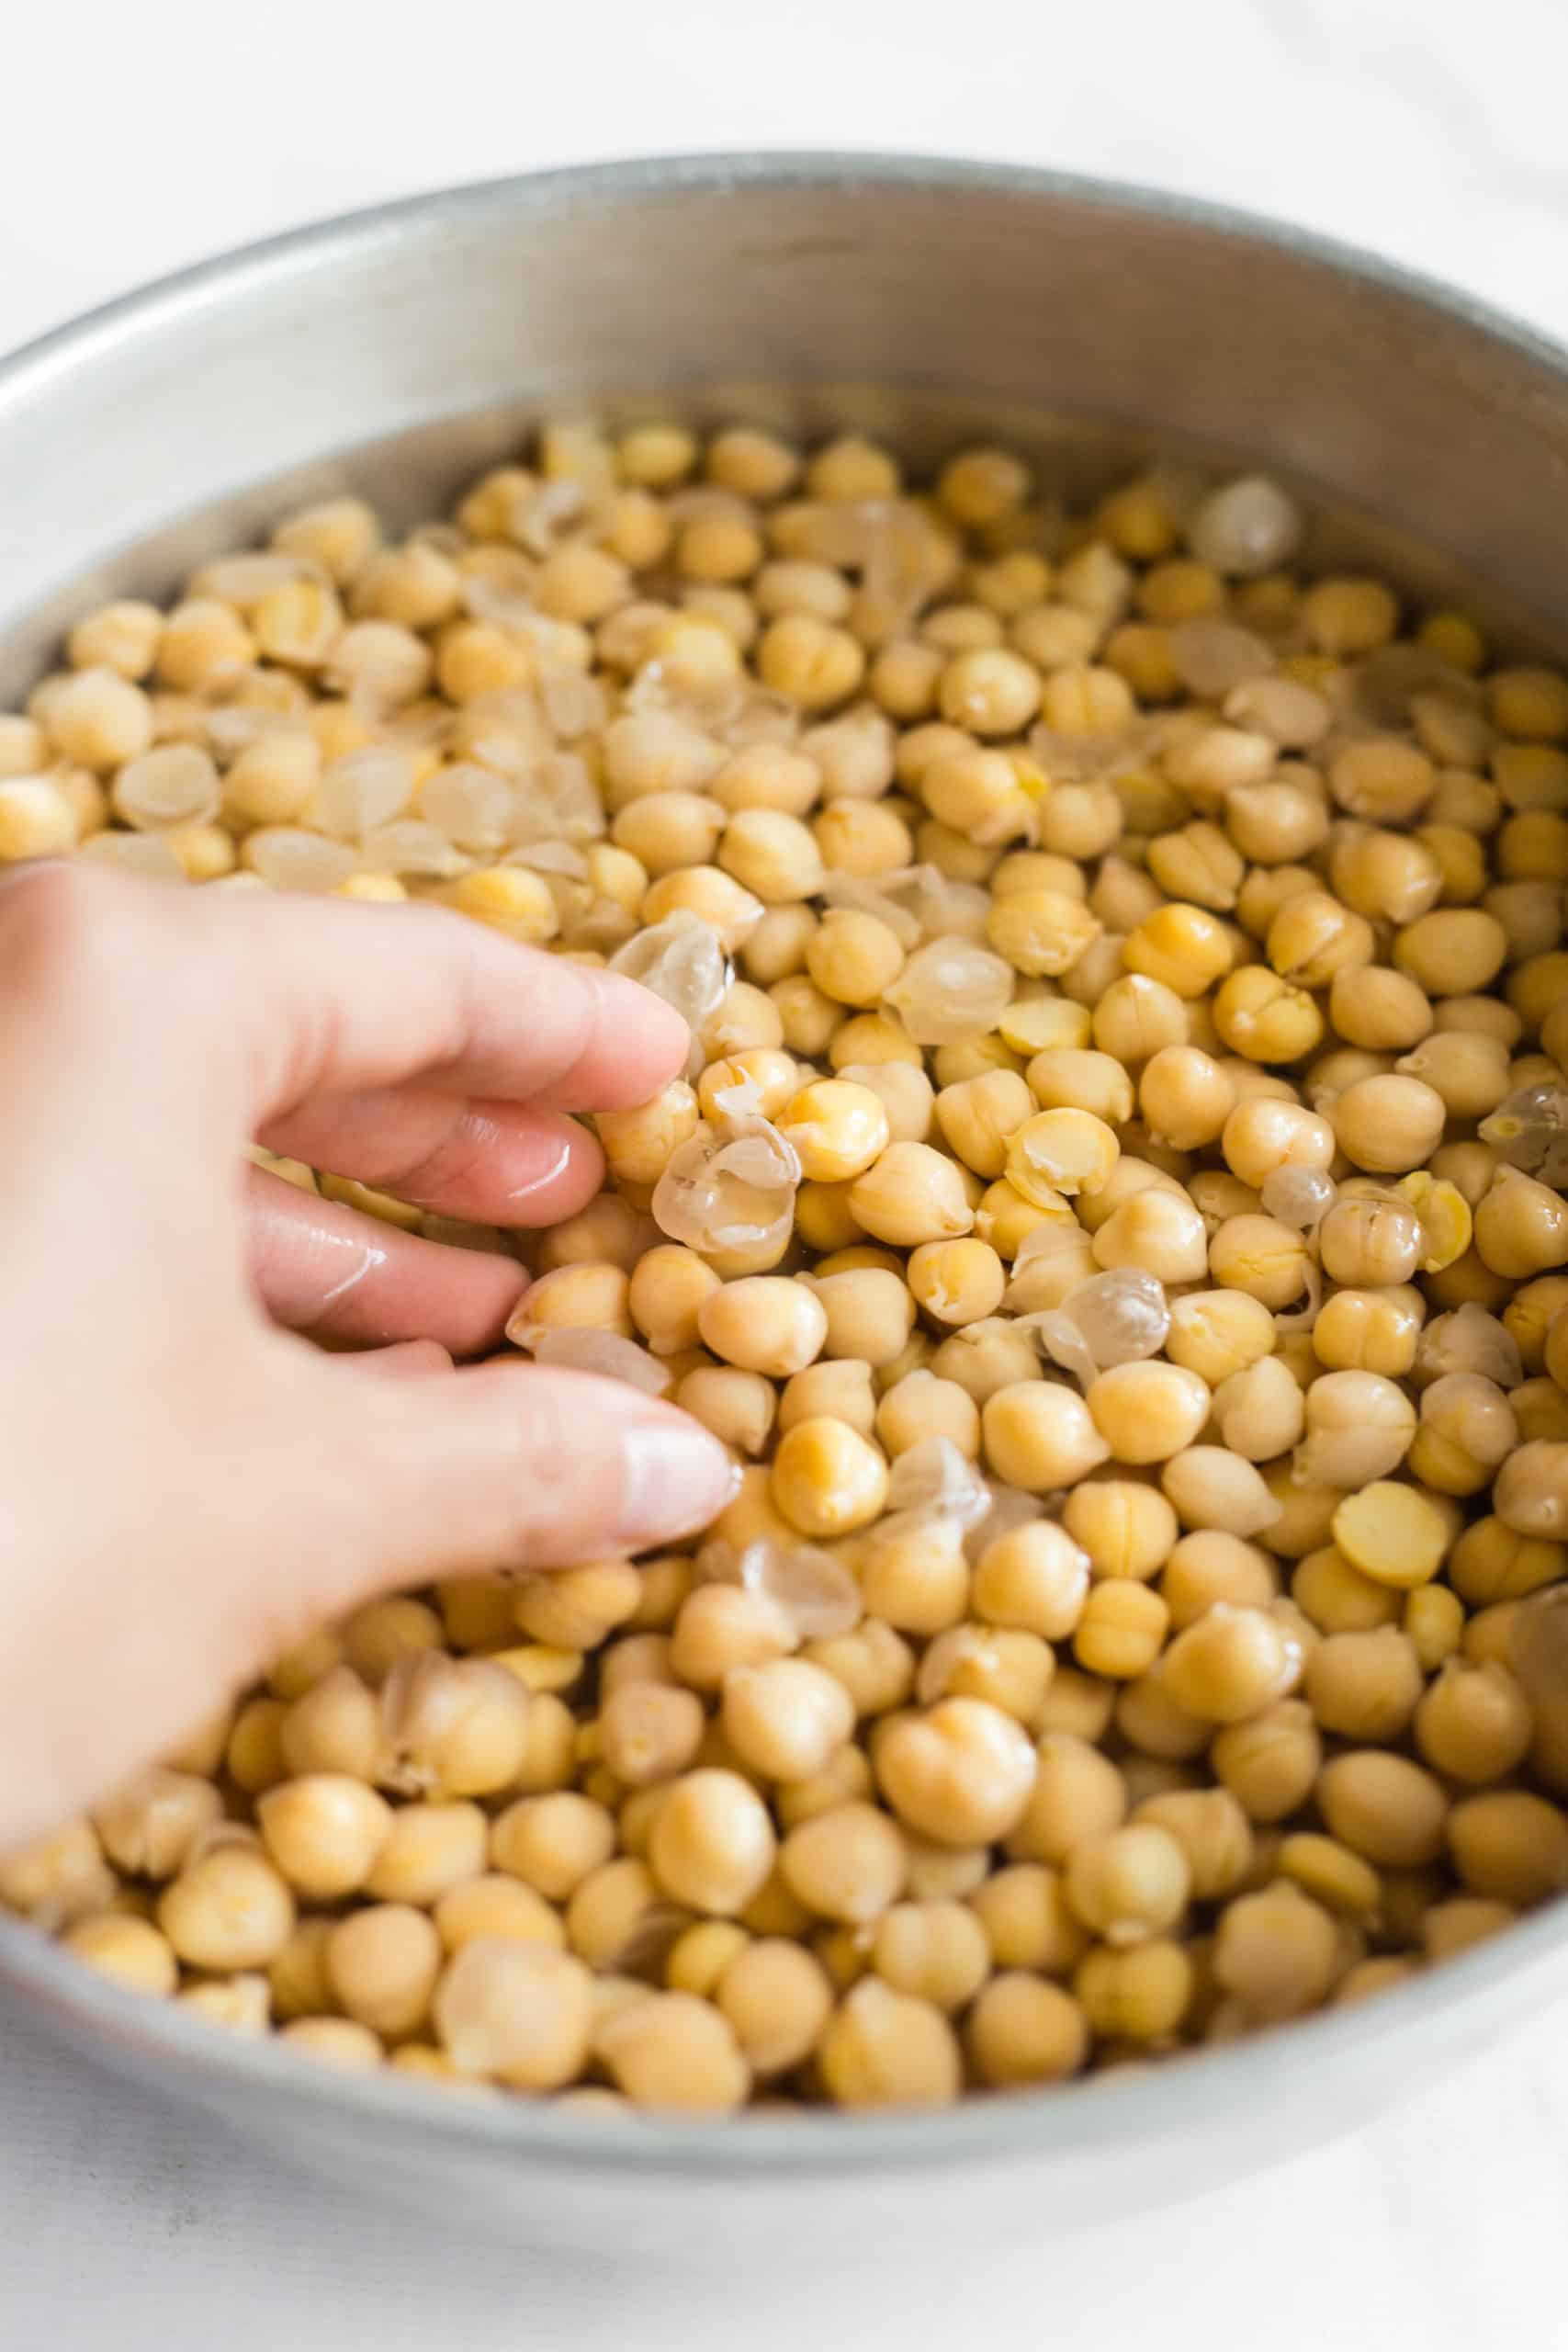 Soaking the cooked chickpeas in hot water and baking soda to get the skins to come off.